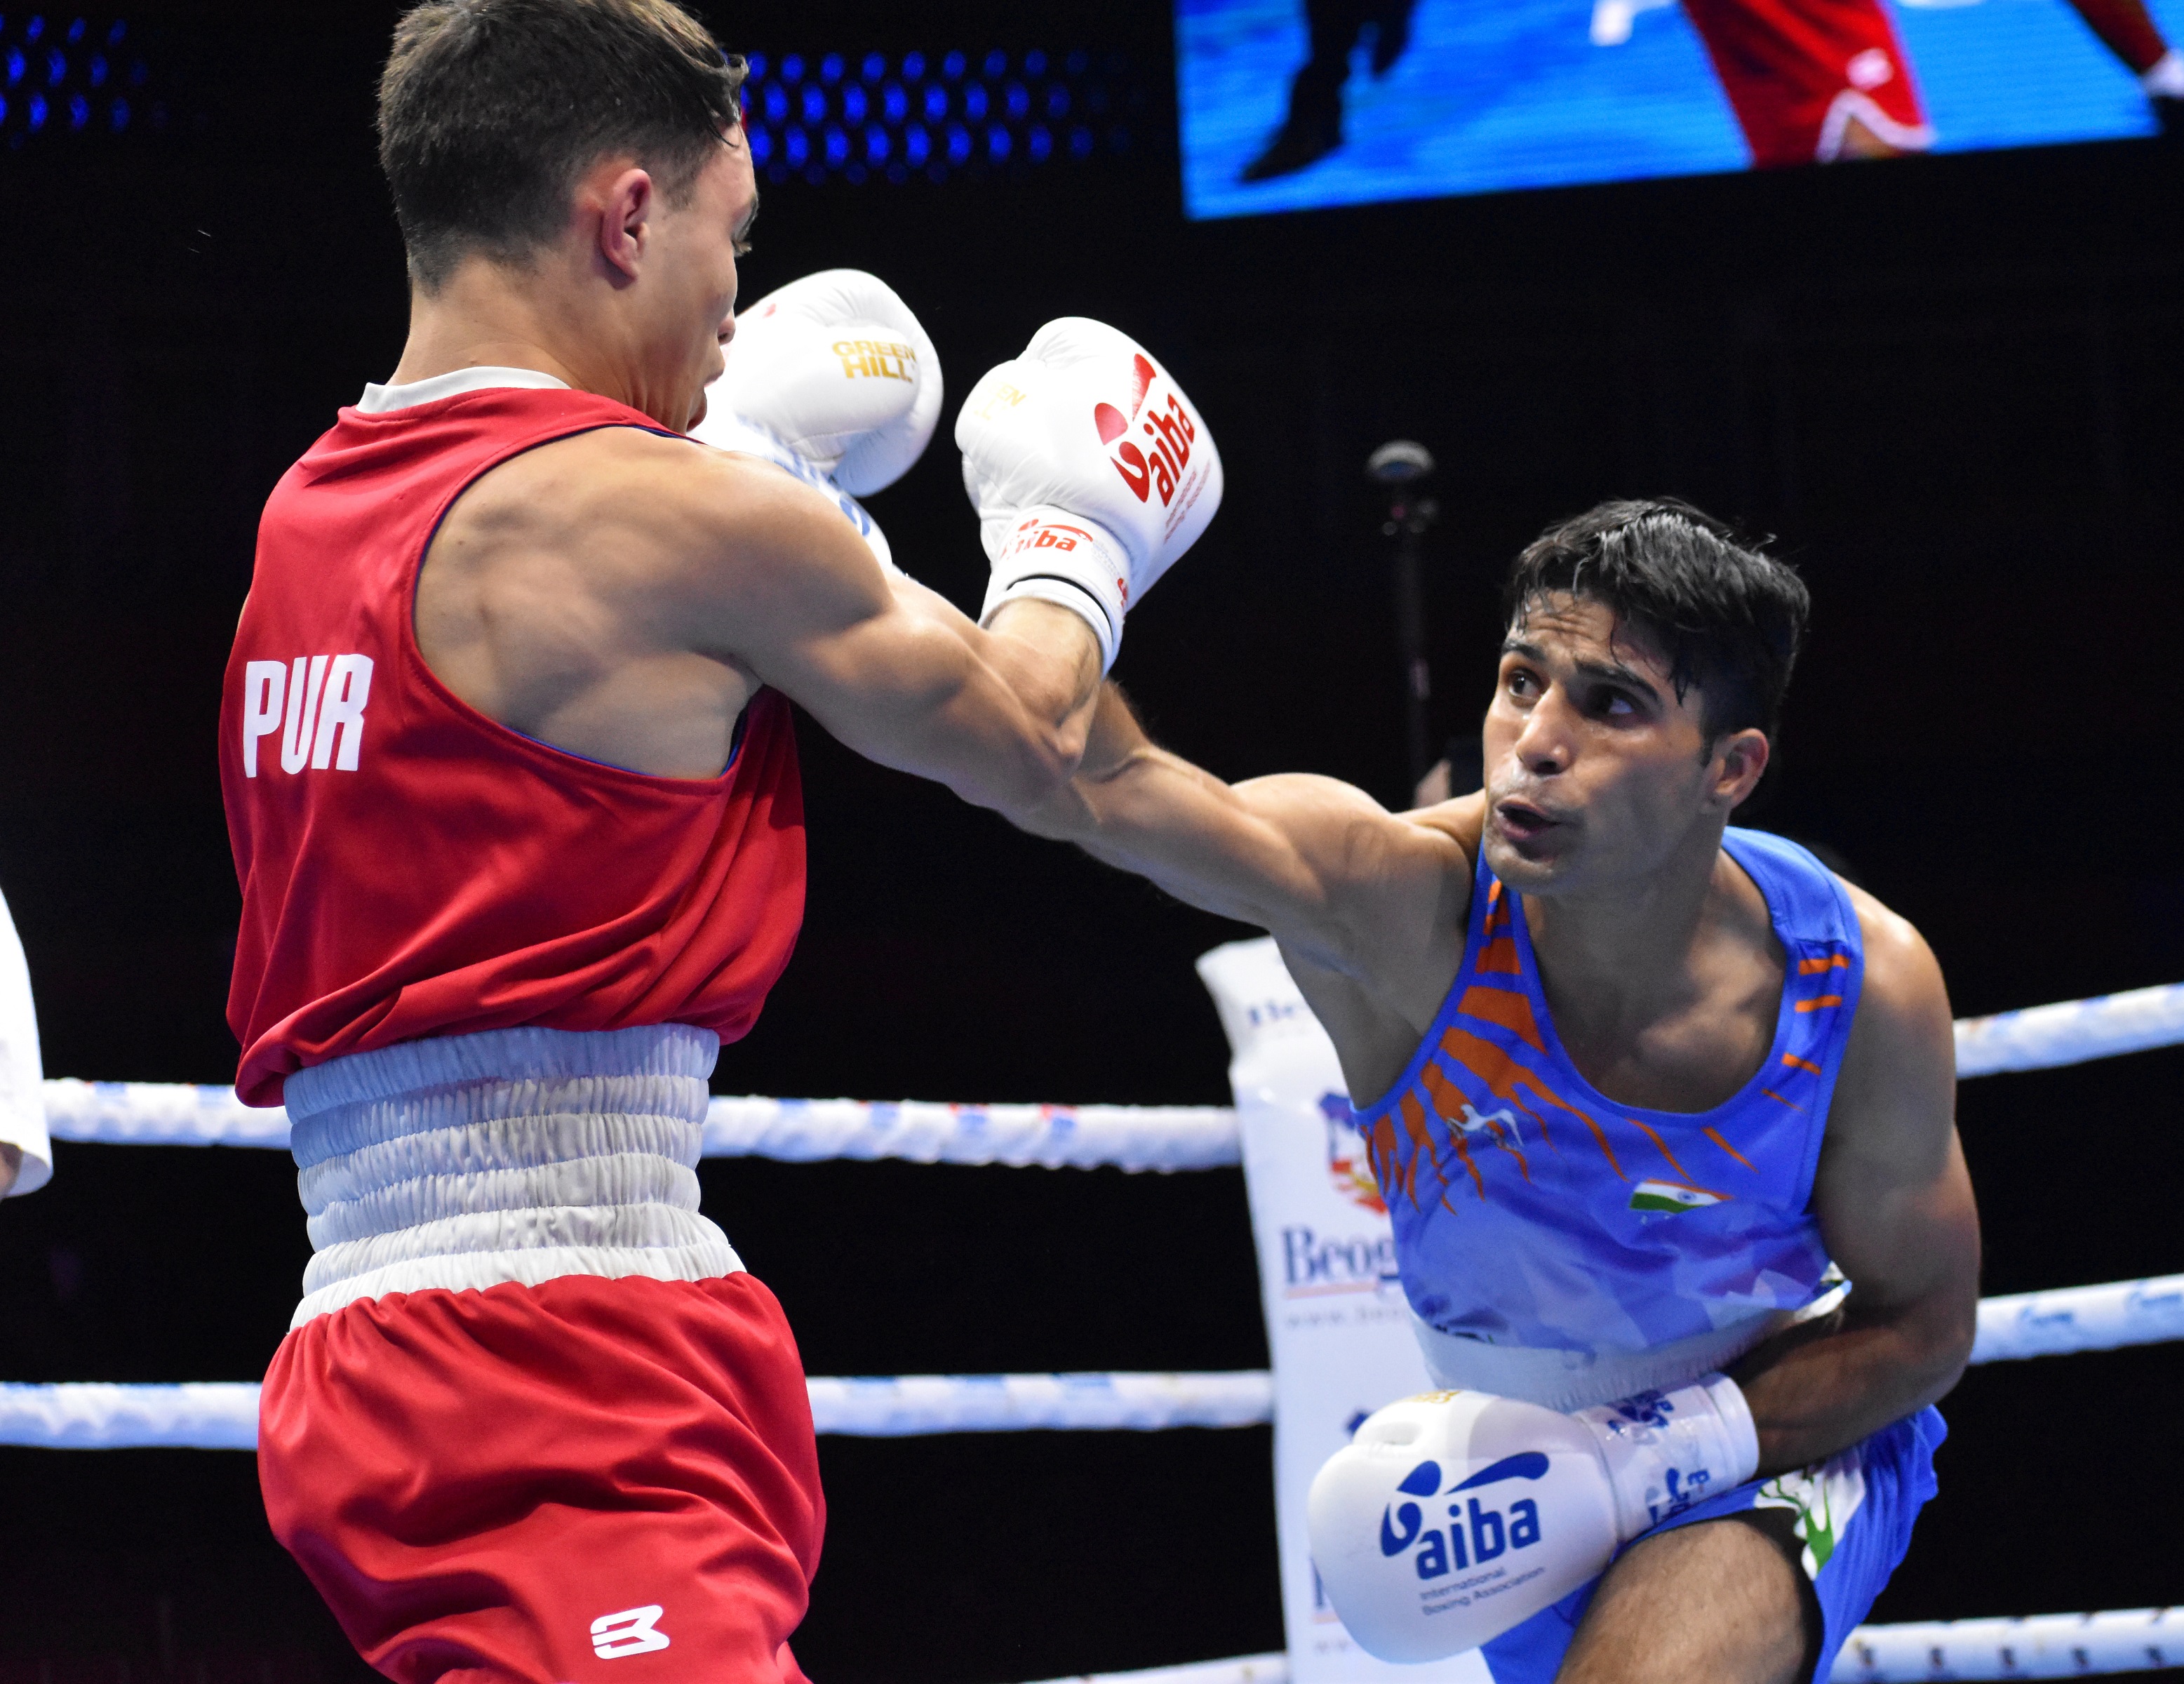 AIBA Men's Boxing Championship | Akash Kumar enters quarter-finals, one step away from medal